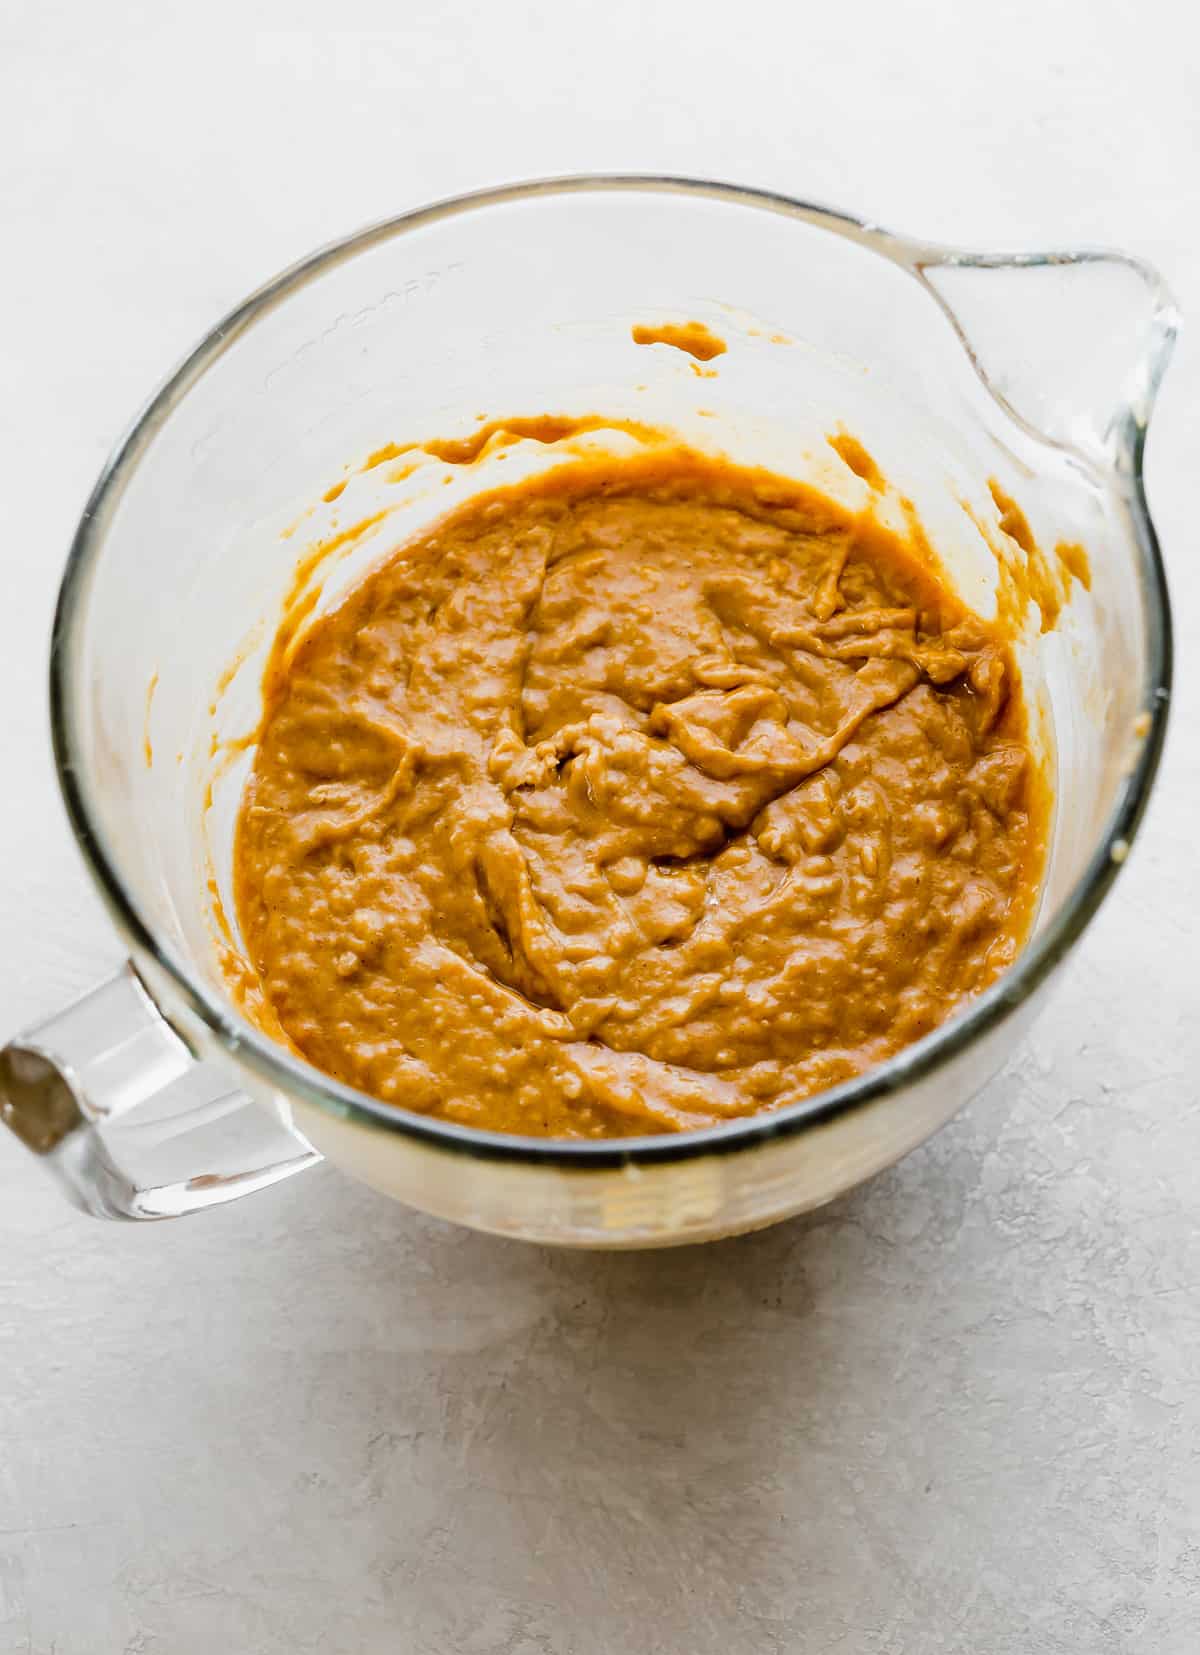 Pumpkin Cake batter in a glass mixing bowl on a white background.